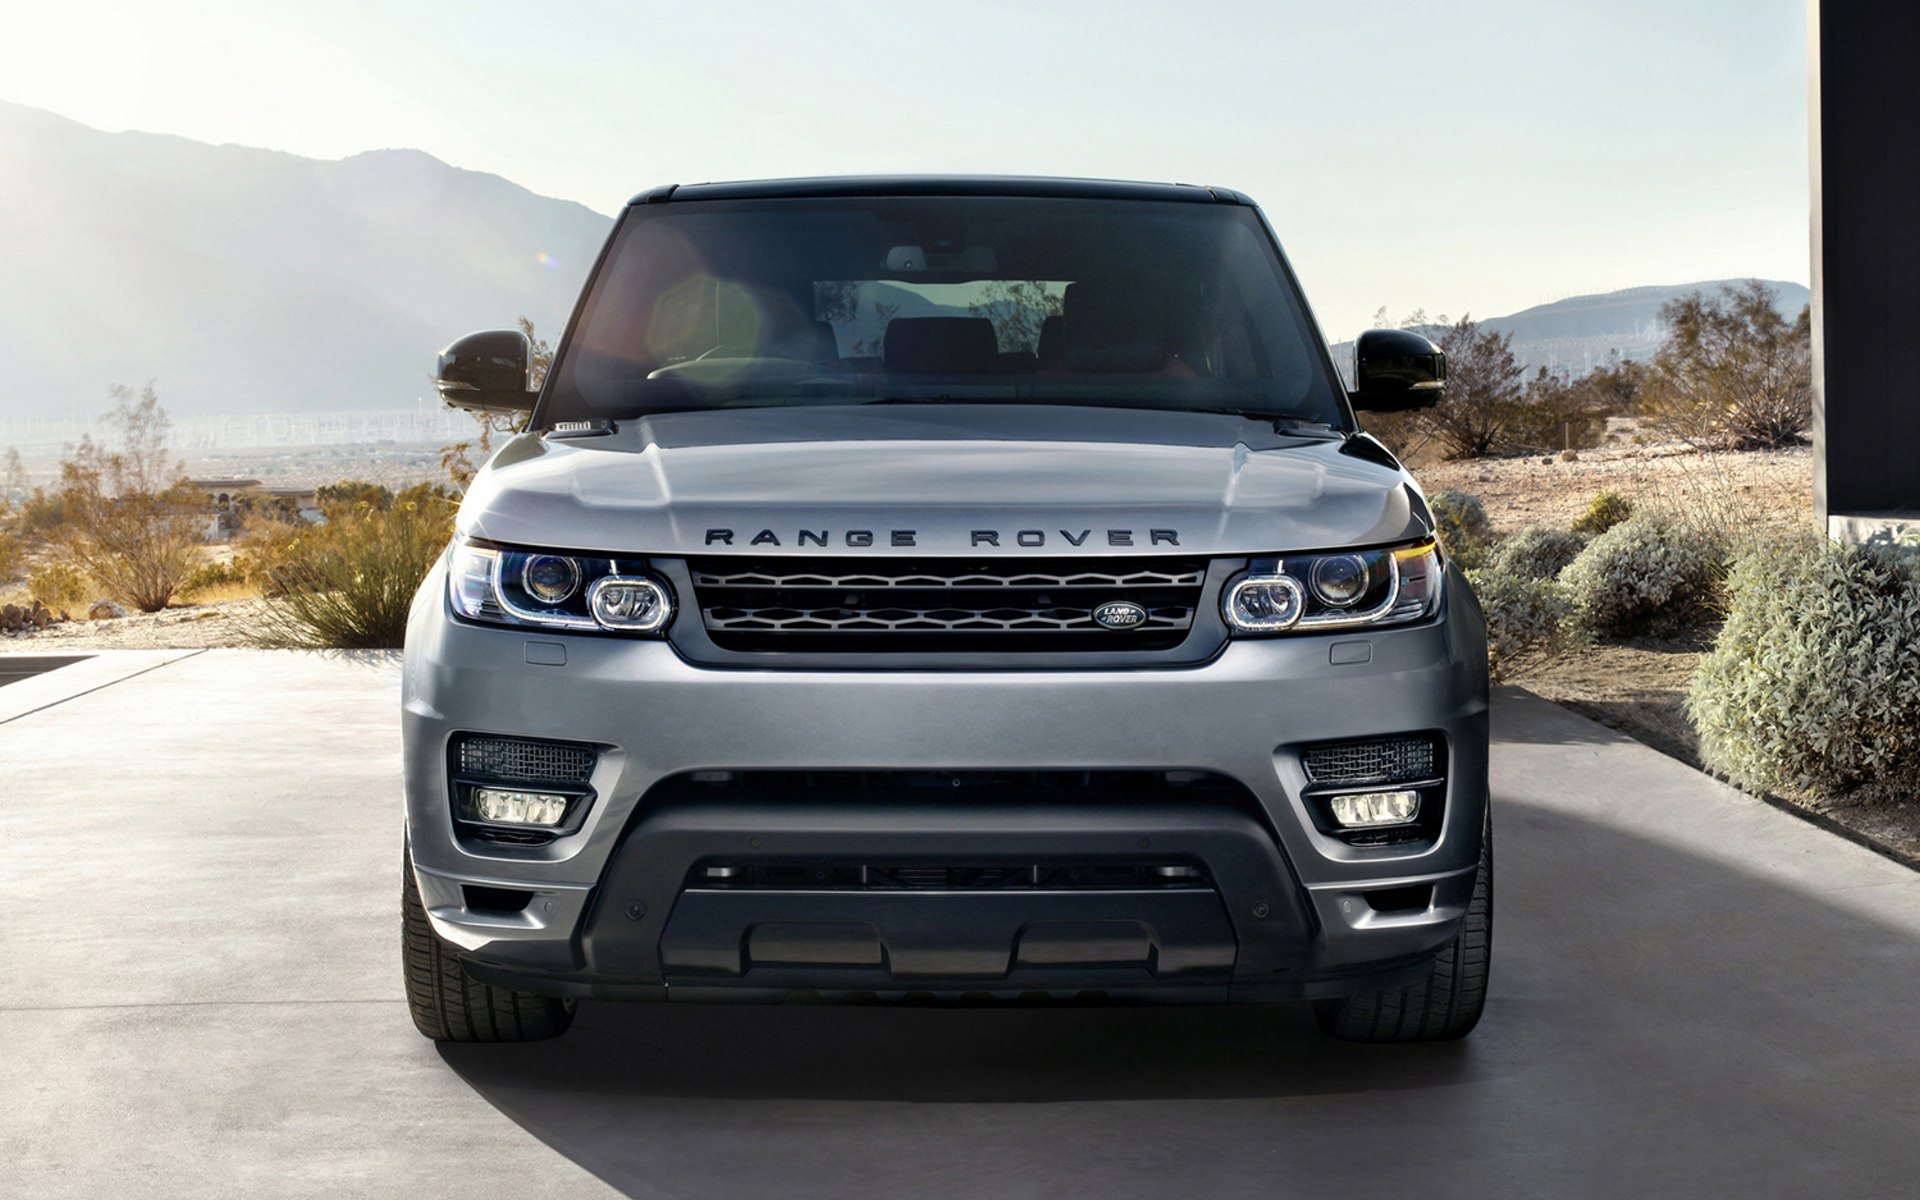 Range Rover Sport Wallpaper HD Full HD Pictures